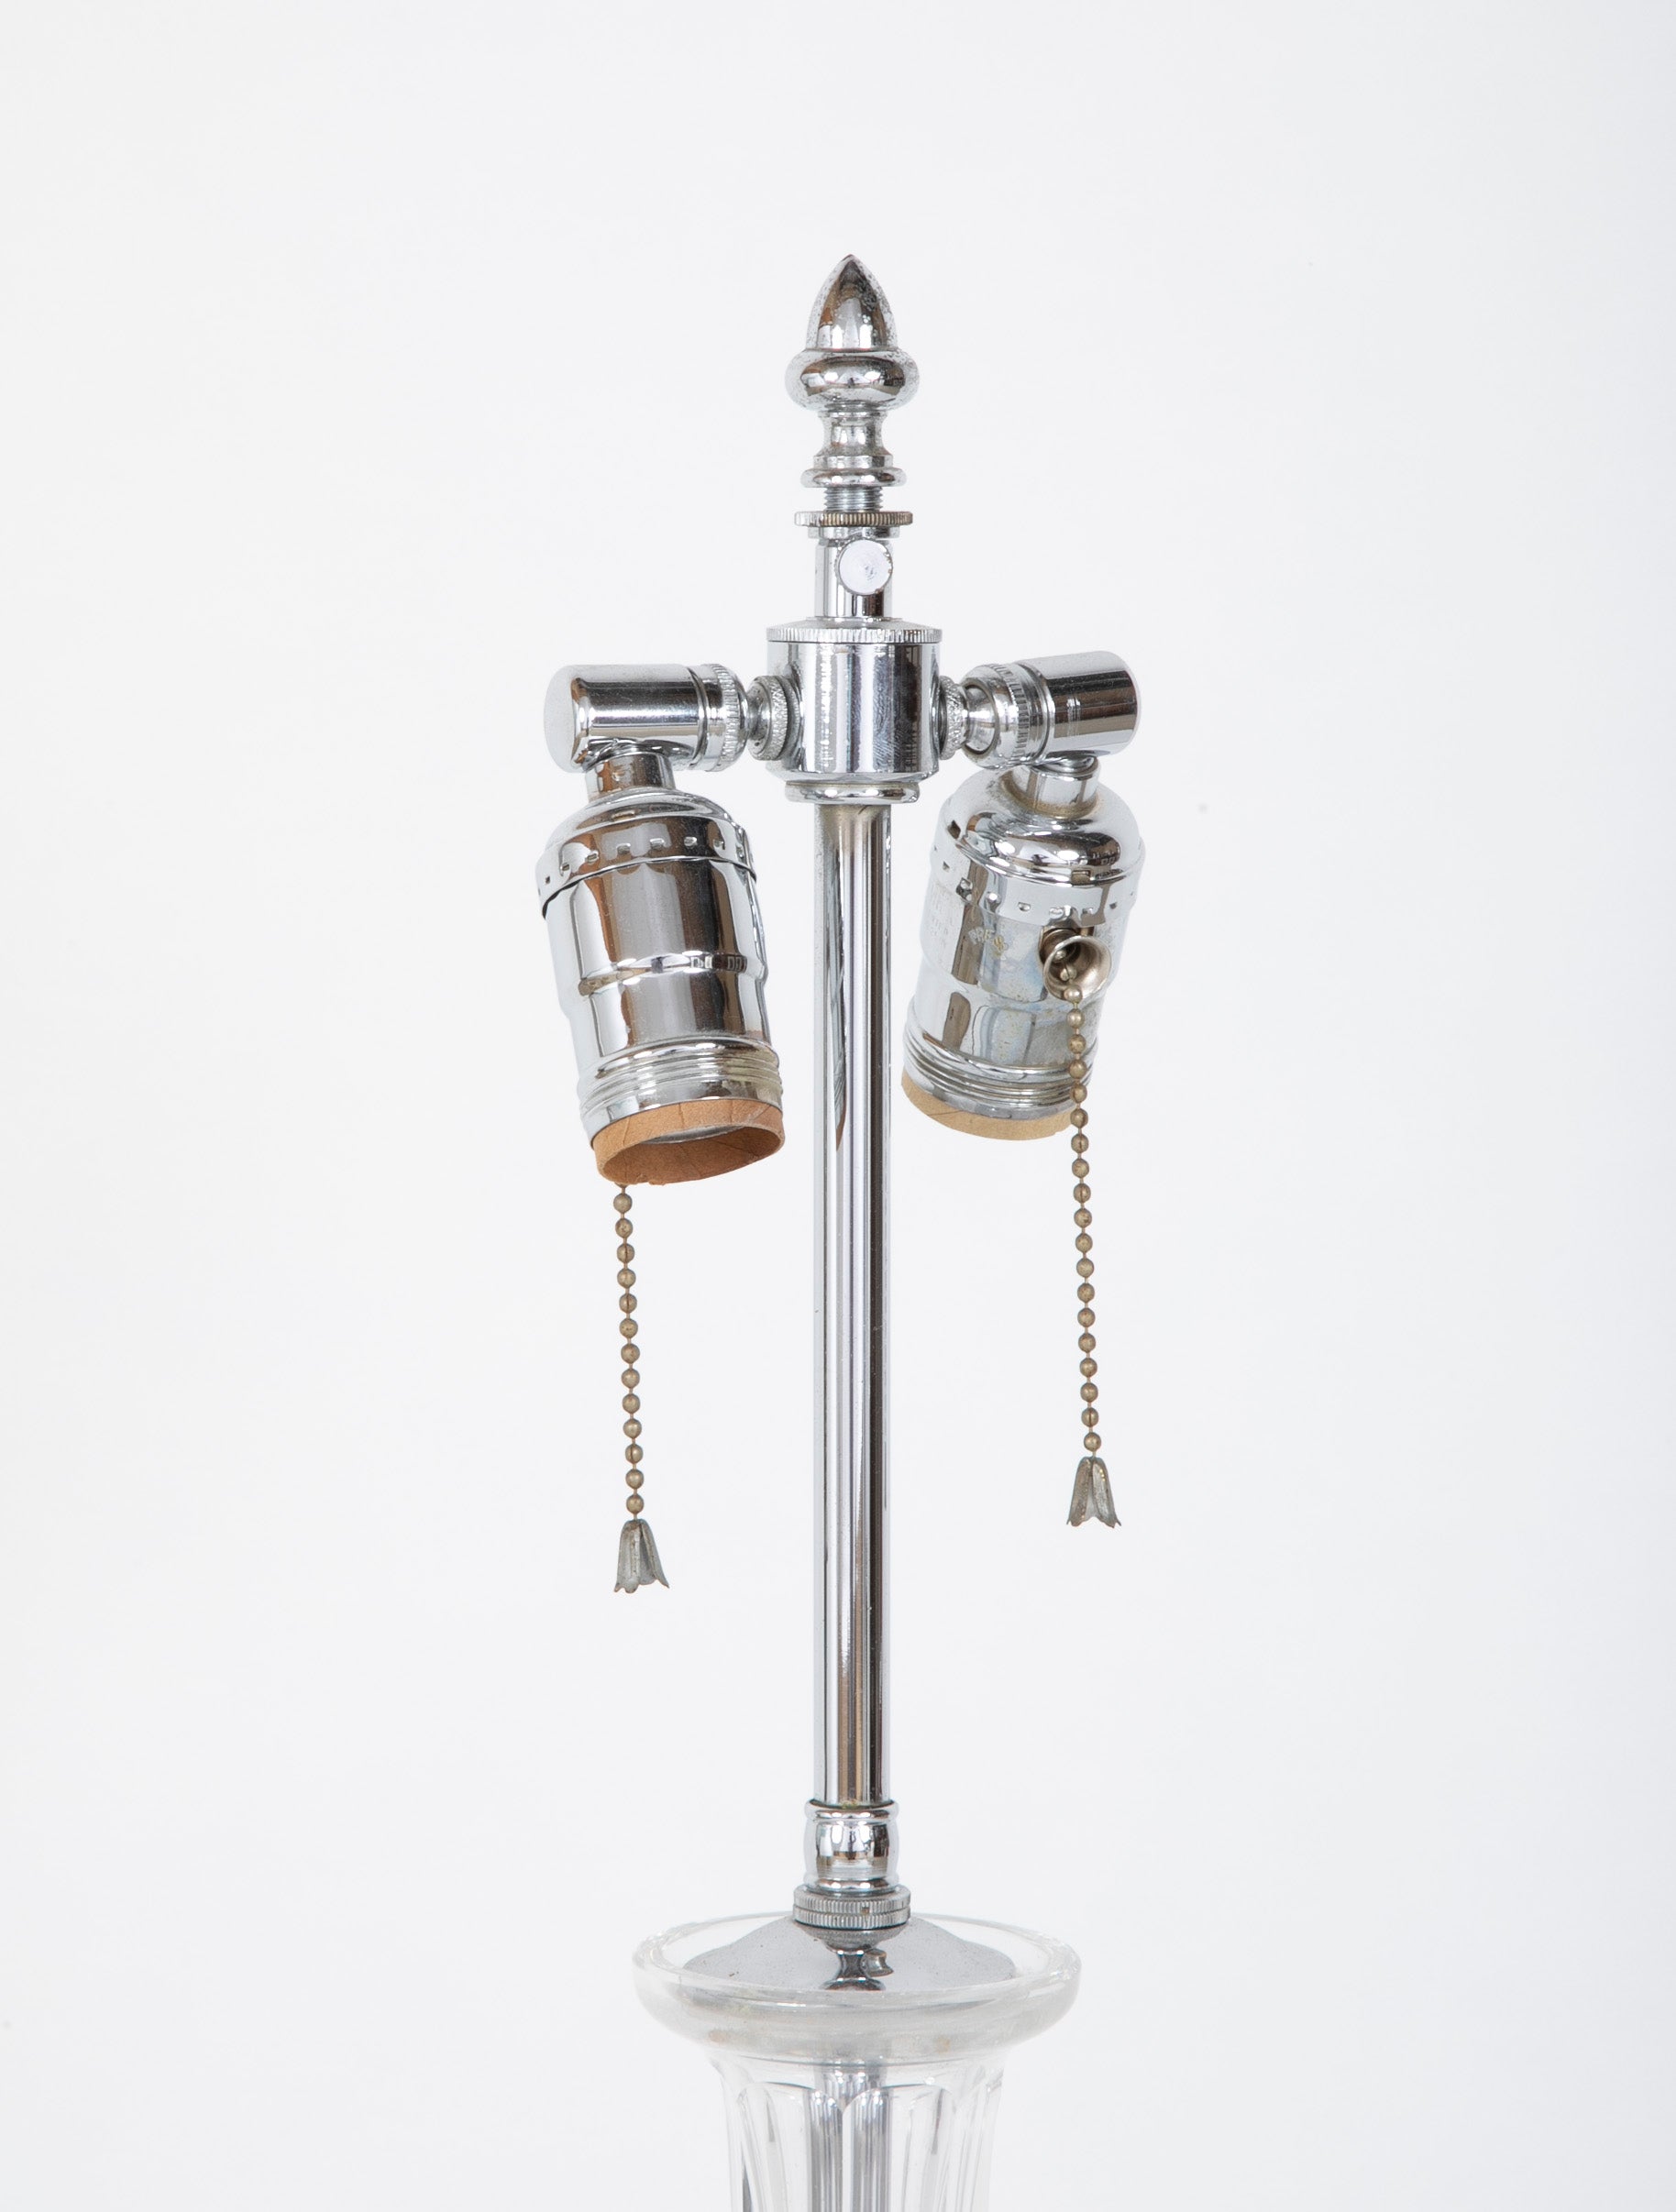 A Pair of Fine Quality Crystal Candlestick Lamps